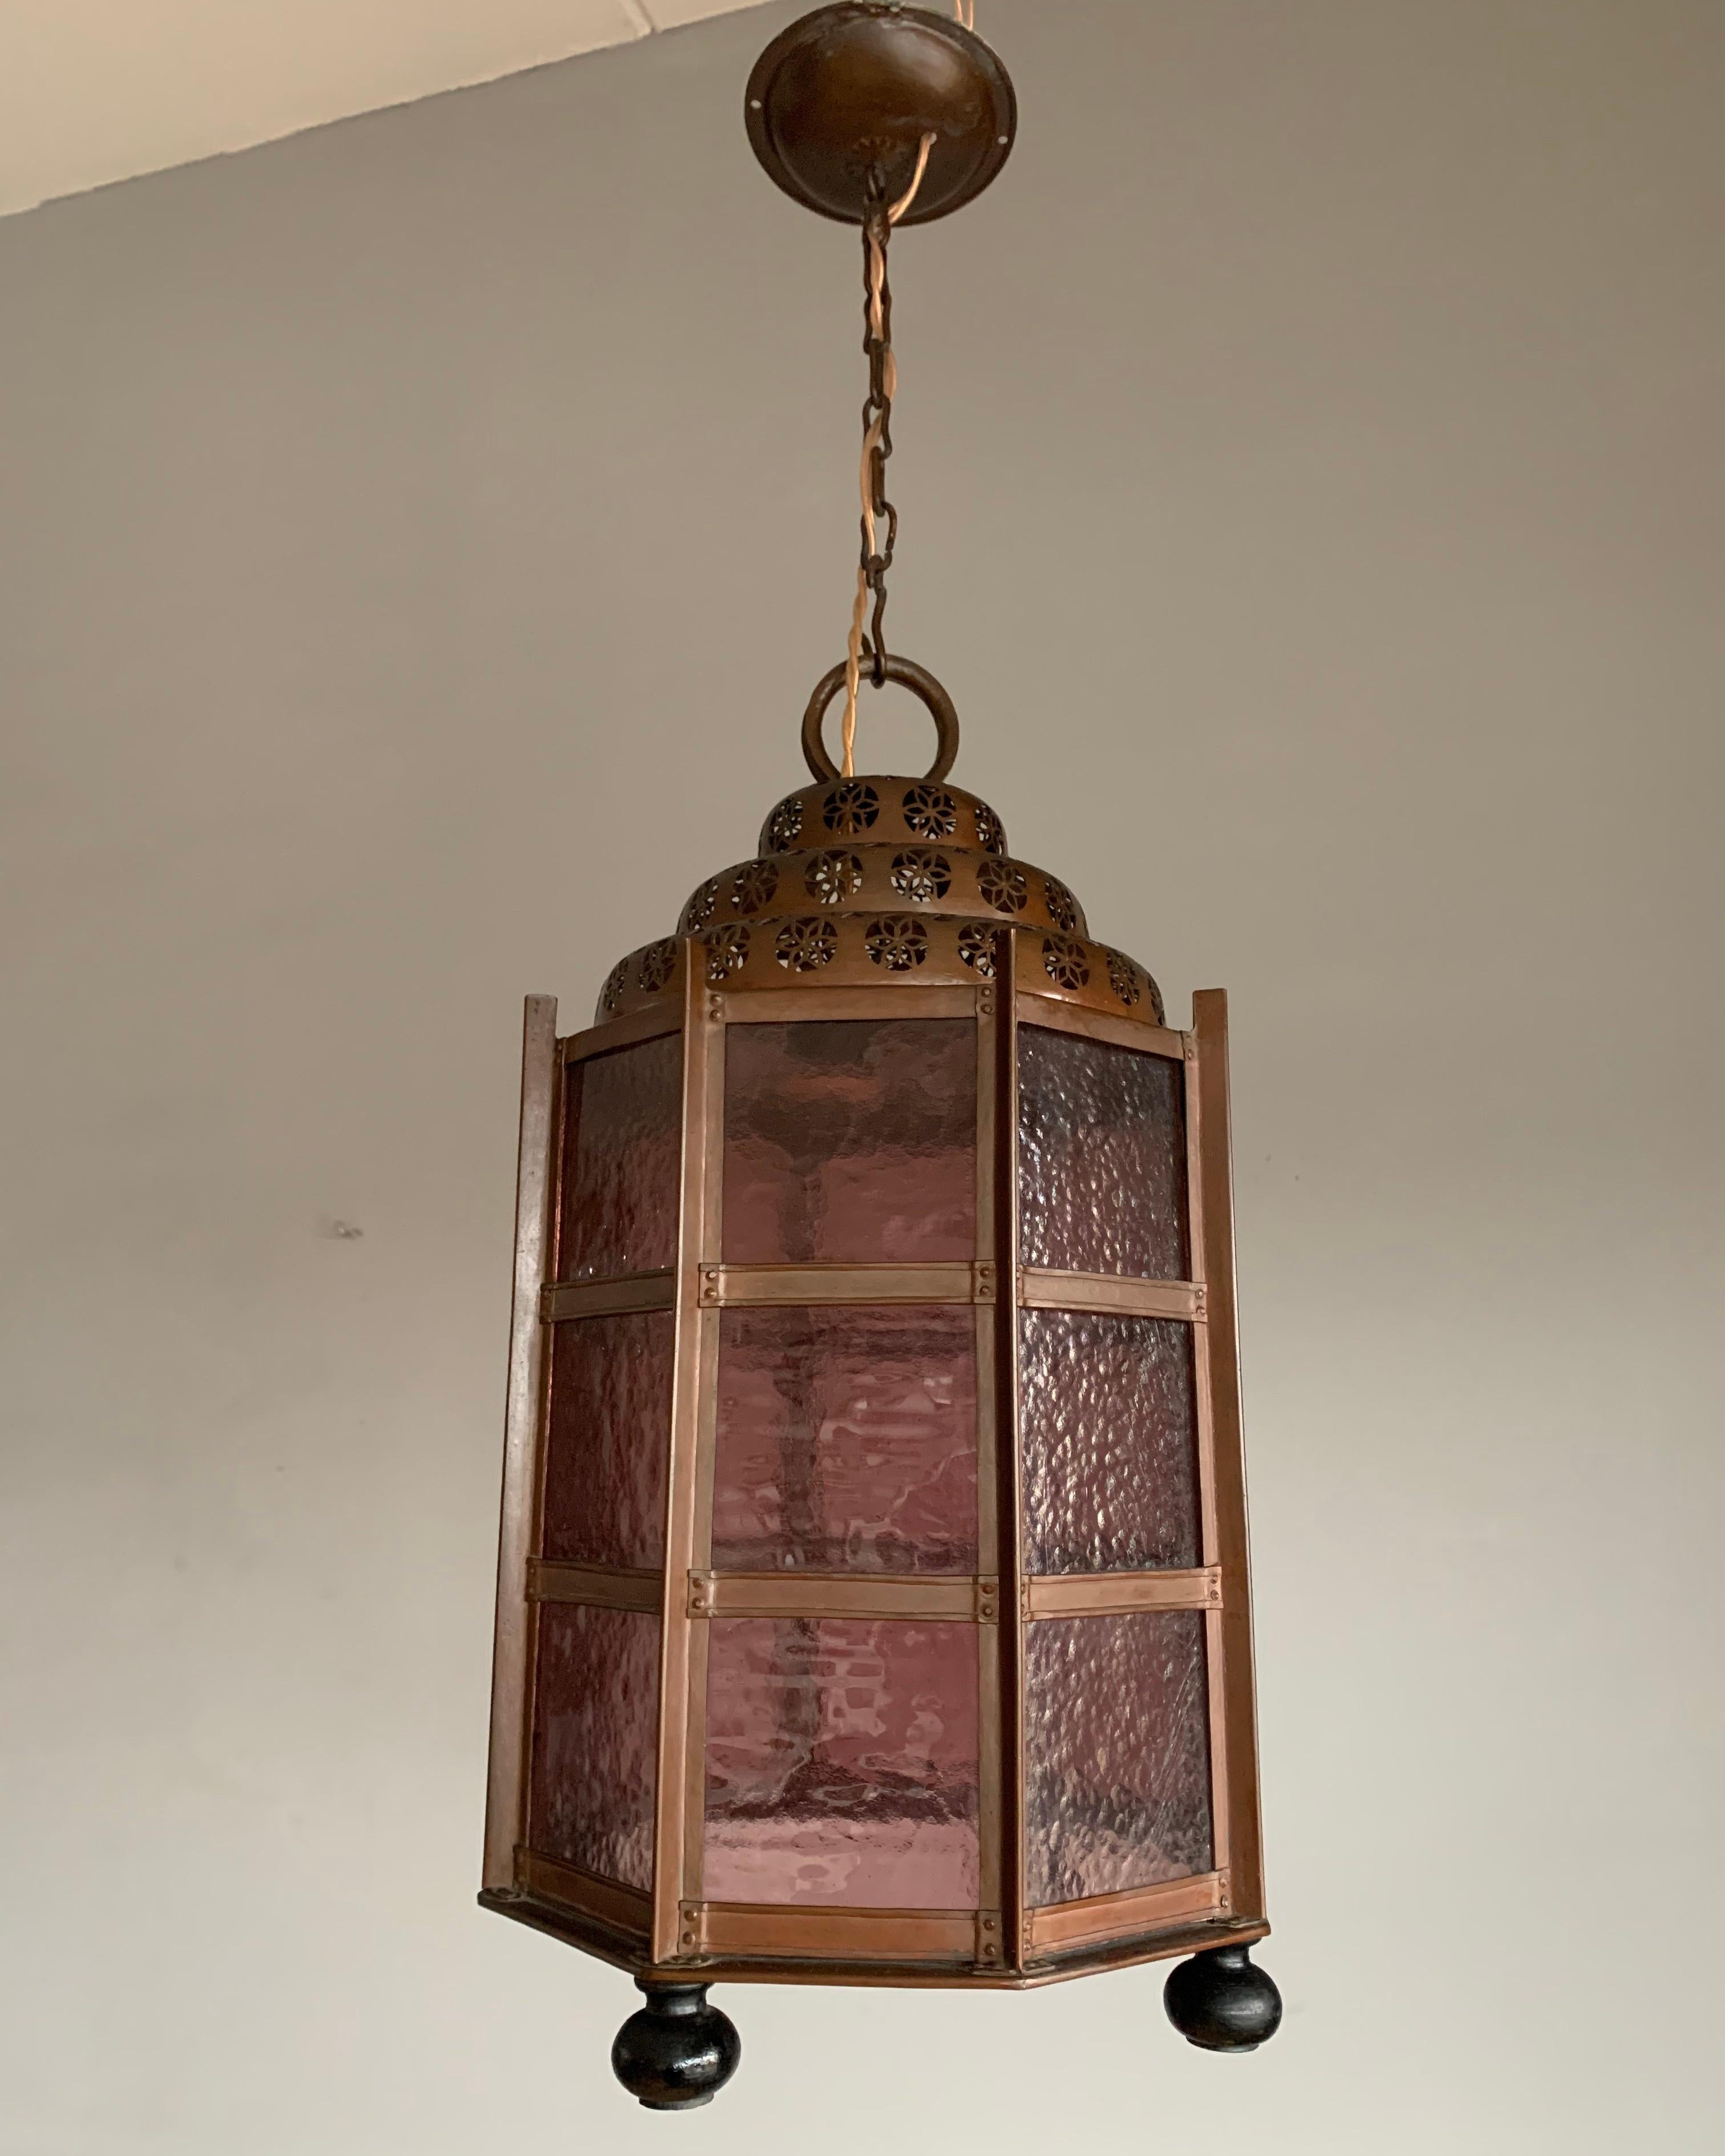 One of a kind and great looking antique pendant with cathedral glass.

With antique light fixtures as one of our specialties, we know how rare handcrafted Moorish lanterns are and to have found one of this age, size and beauty sure made our day.